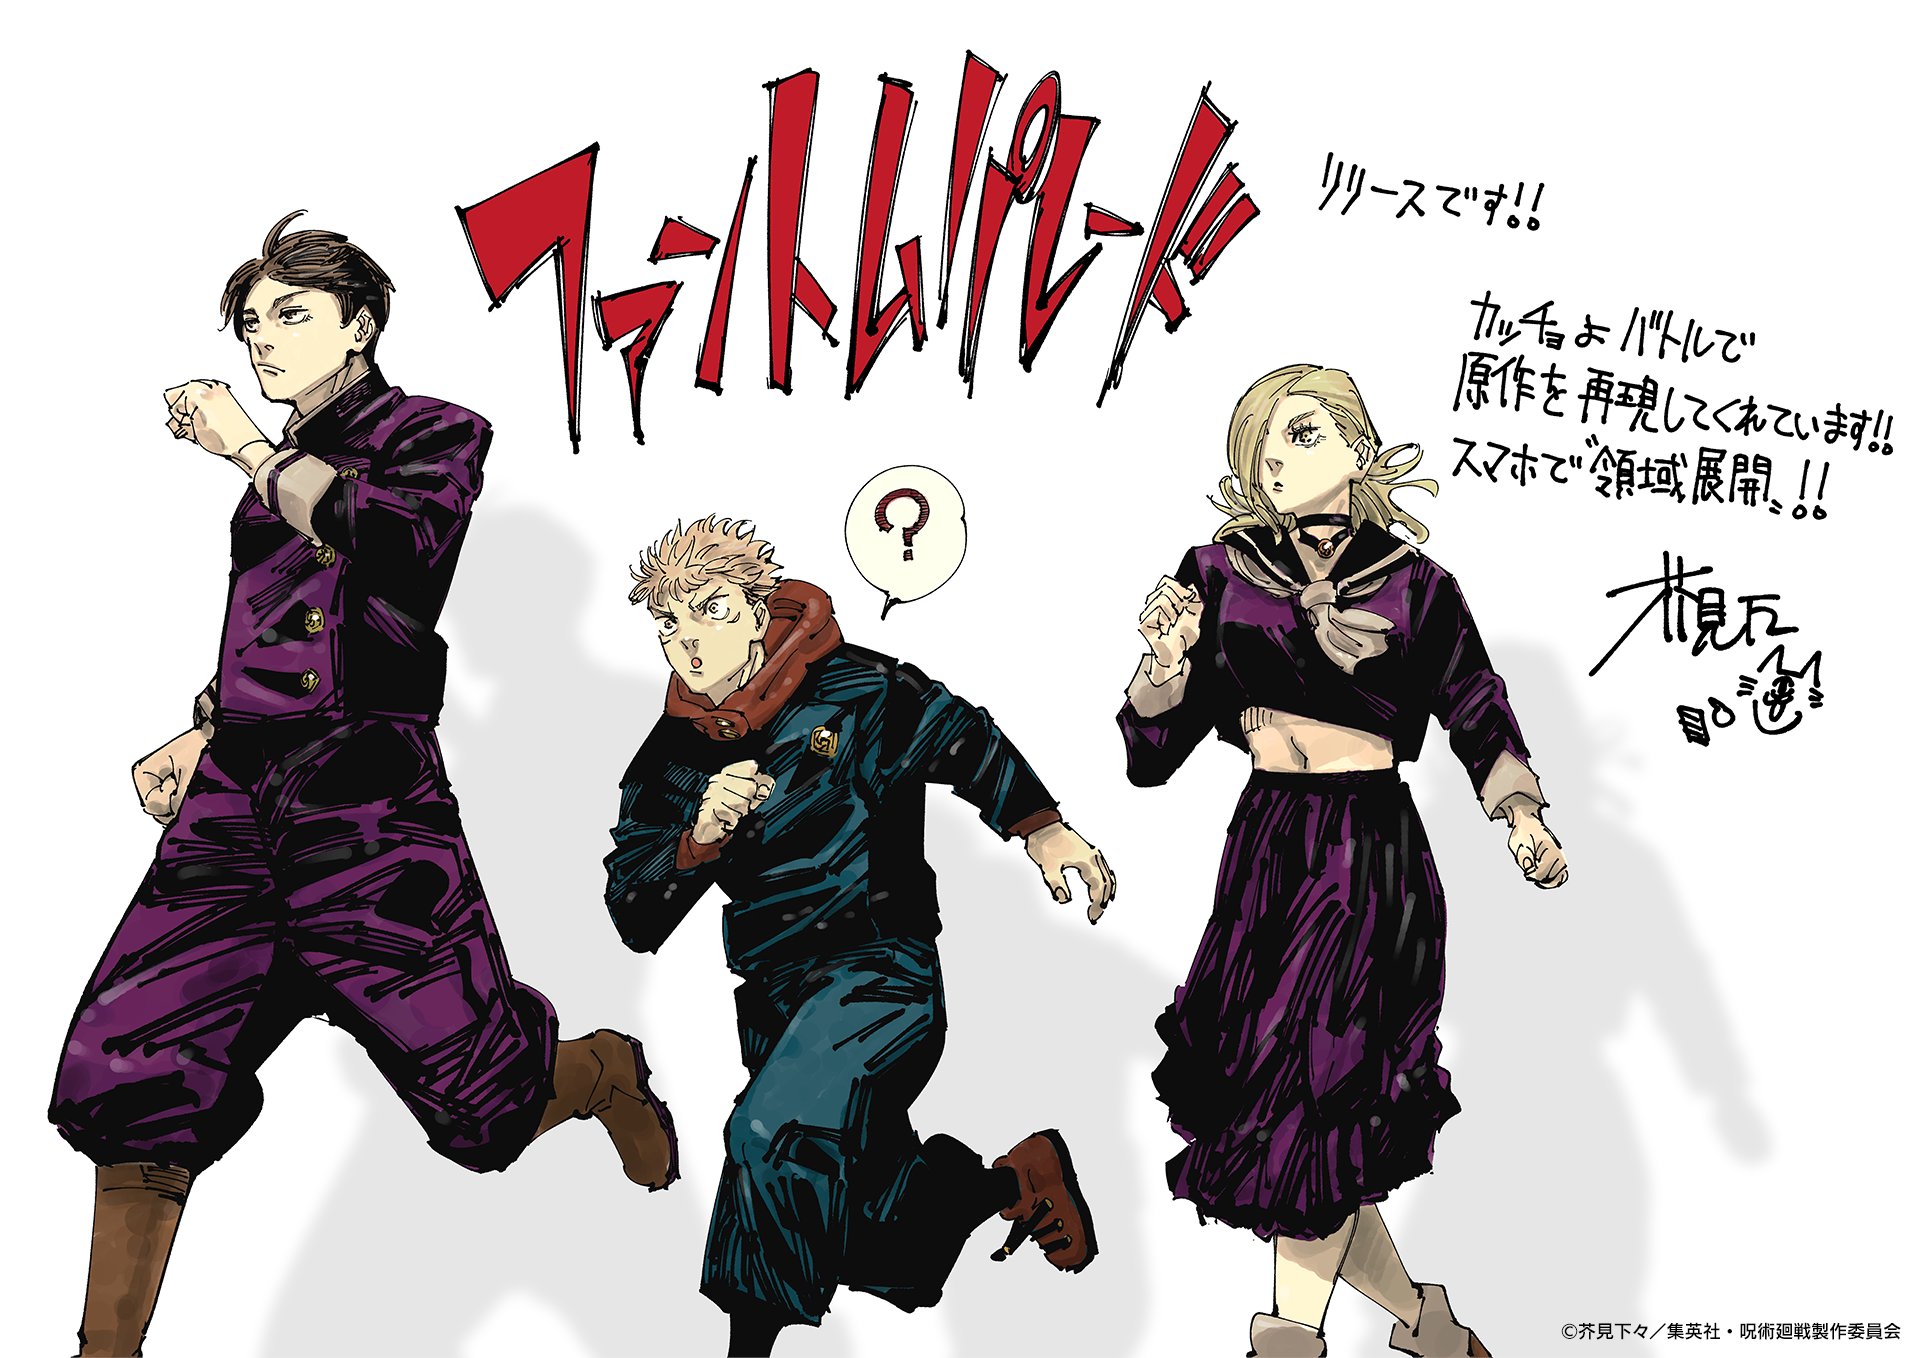 Jujutsu Kaisen on X: New Jujutsu Kaisen Illustration from Akutami Gege on  release of Phantom Parade Game The other two characters are game original  t.coD1RCcGVGAv  X